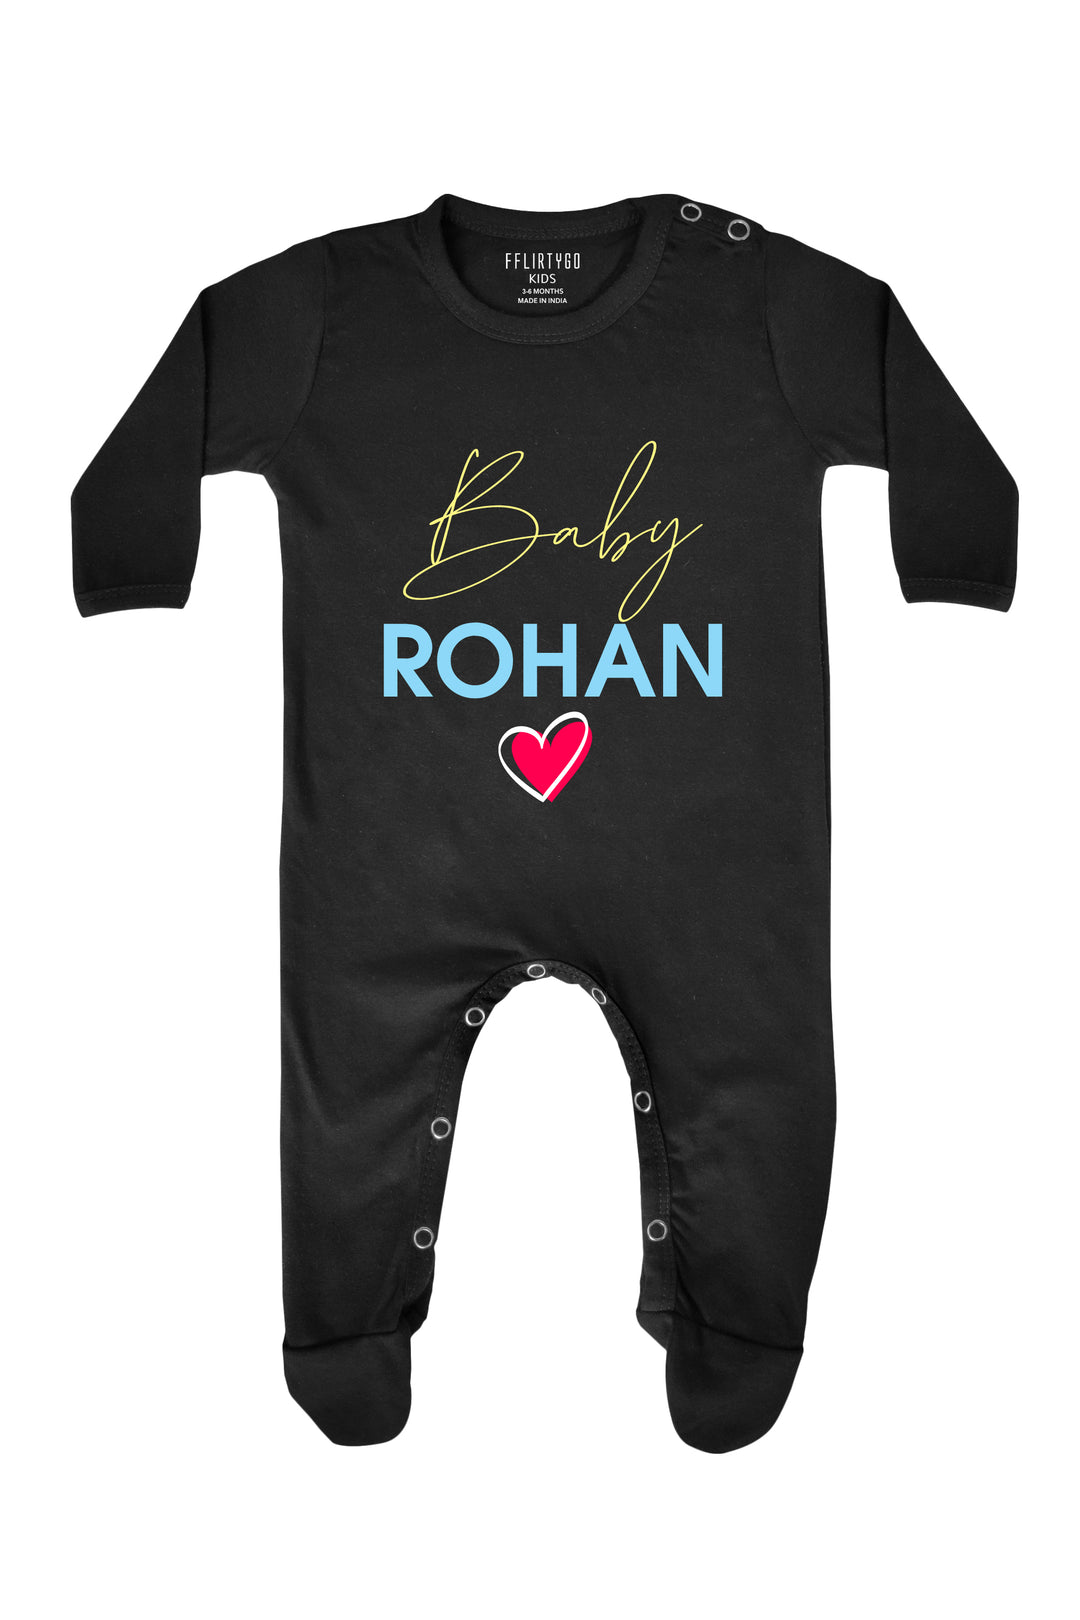 A Baby With Heart Baby Romper | Onesies w/ Custom Name